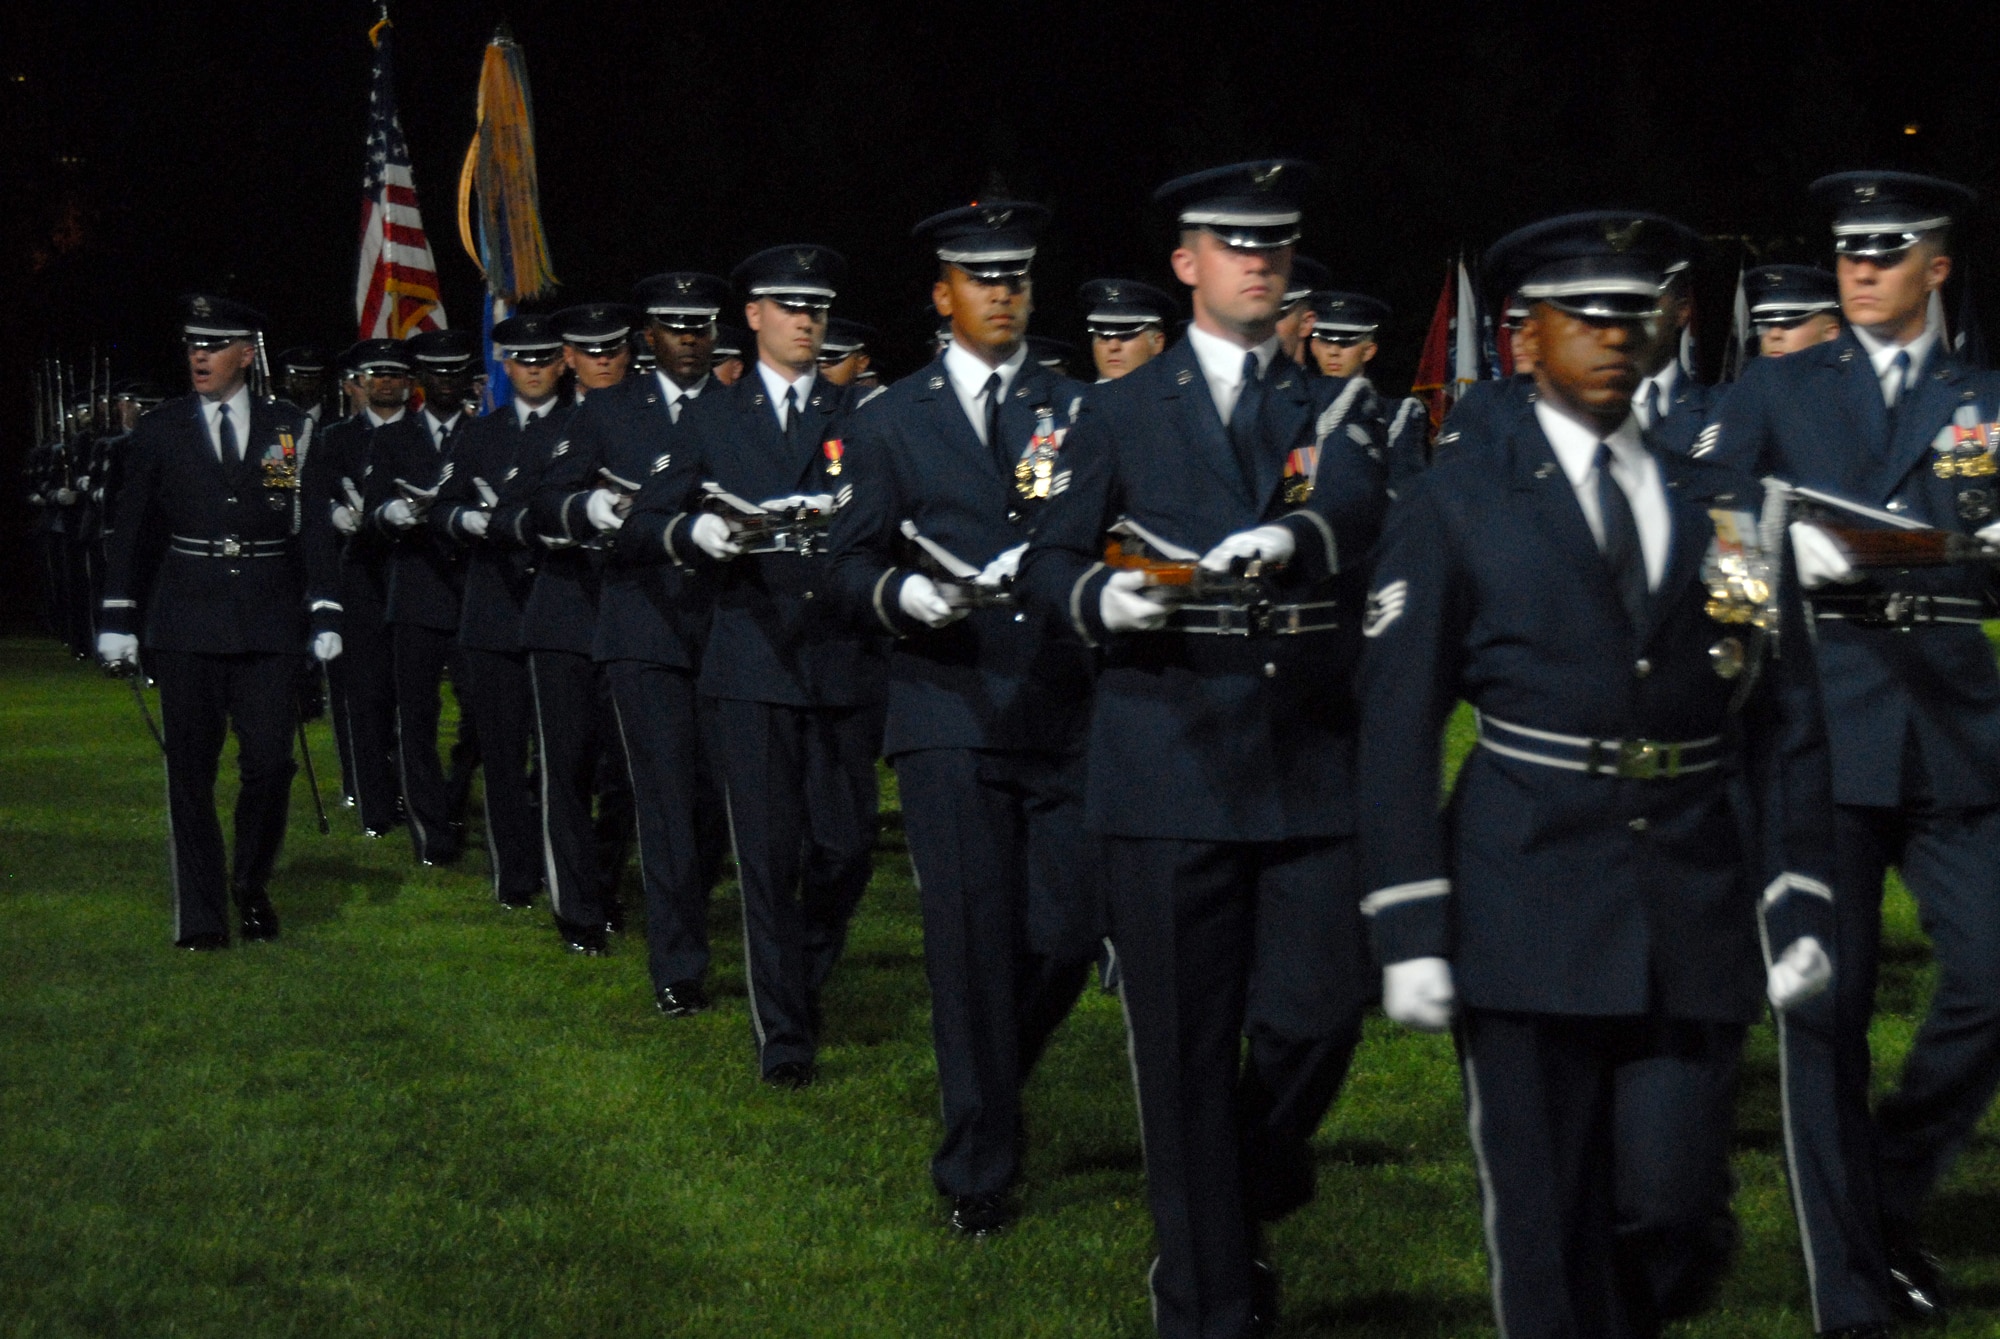 BOLLING AFB, D.C. -- Airmen from the Air Force Honor Guard perform a pass in review during the 60th Anniversary Air Force Tattoo dress rehearsal Sept. 22.
The military tattoo, which is held annually at Bolling, highlights troop excellence and readiness.  The tattoo dates back to the mid-17th century British Army deployment to the Netherlands in which drummers were sent from the garrison to the towns at 9:30 each night to let soldiers know it was time to return to the fort.
(U.S. Air Force photo by Staff Sgt. Madelyn Waychoff)